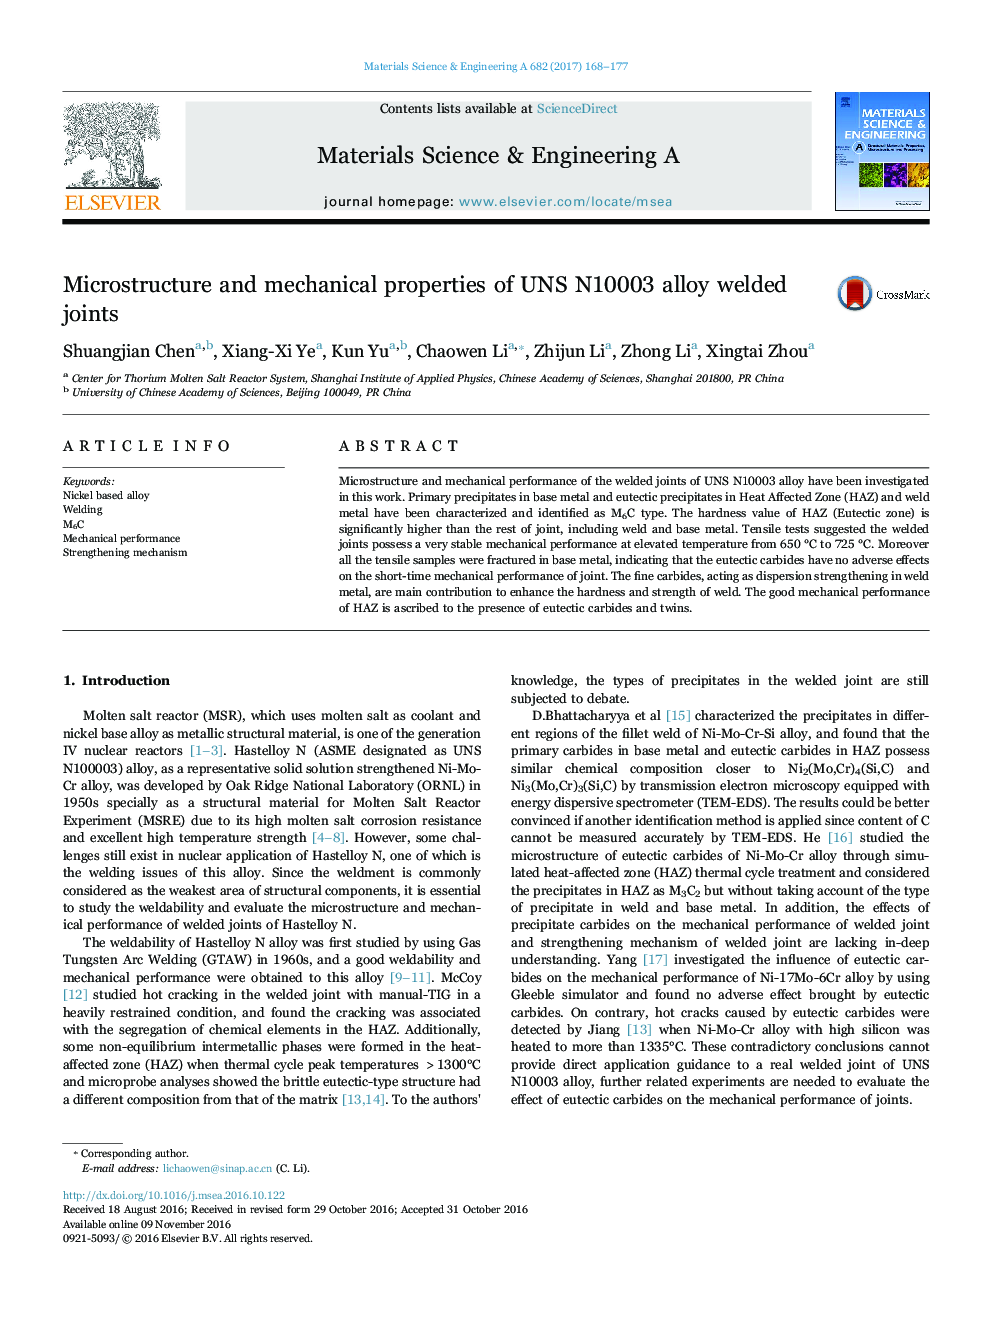 Microstructure and mechanical properties of UNS N10003 alloy welded joints